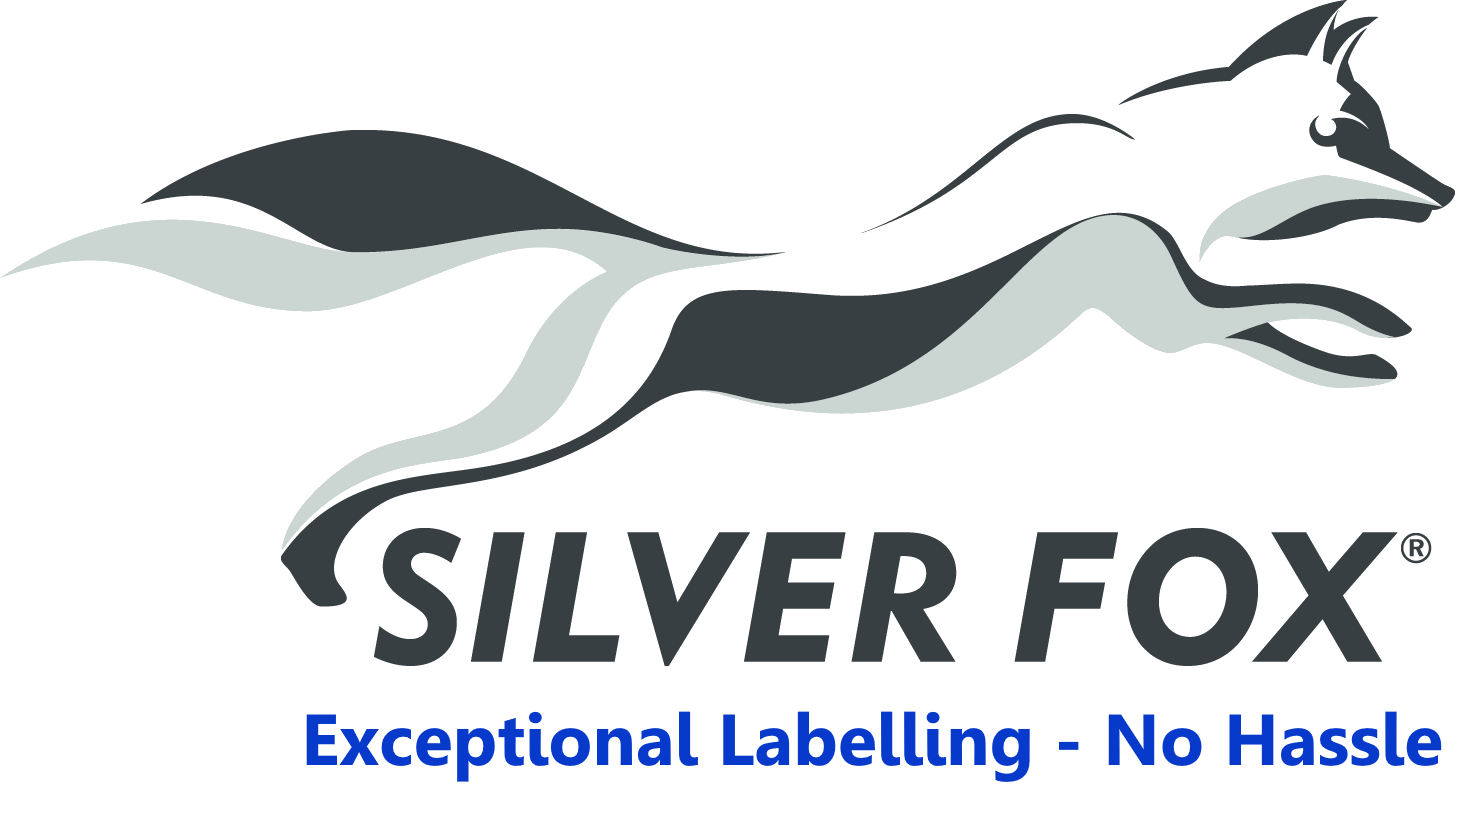 Silver Fox Logo - OEM White Labelling Solutions backed up by continued support.